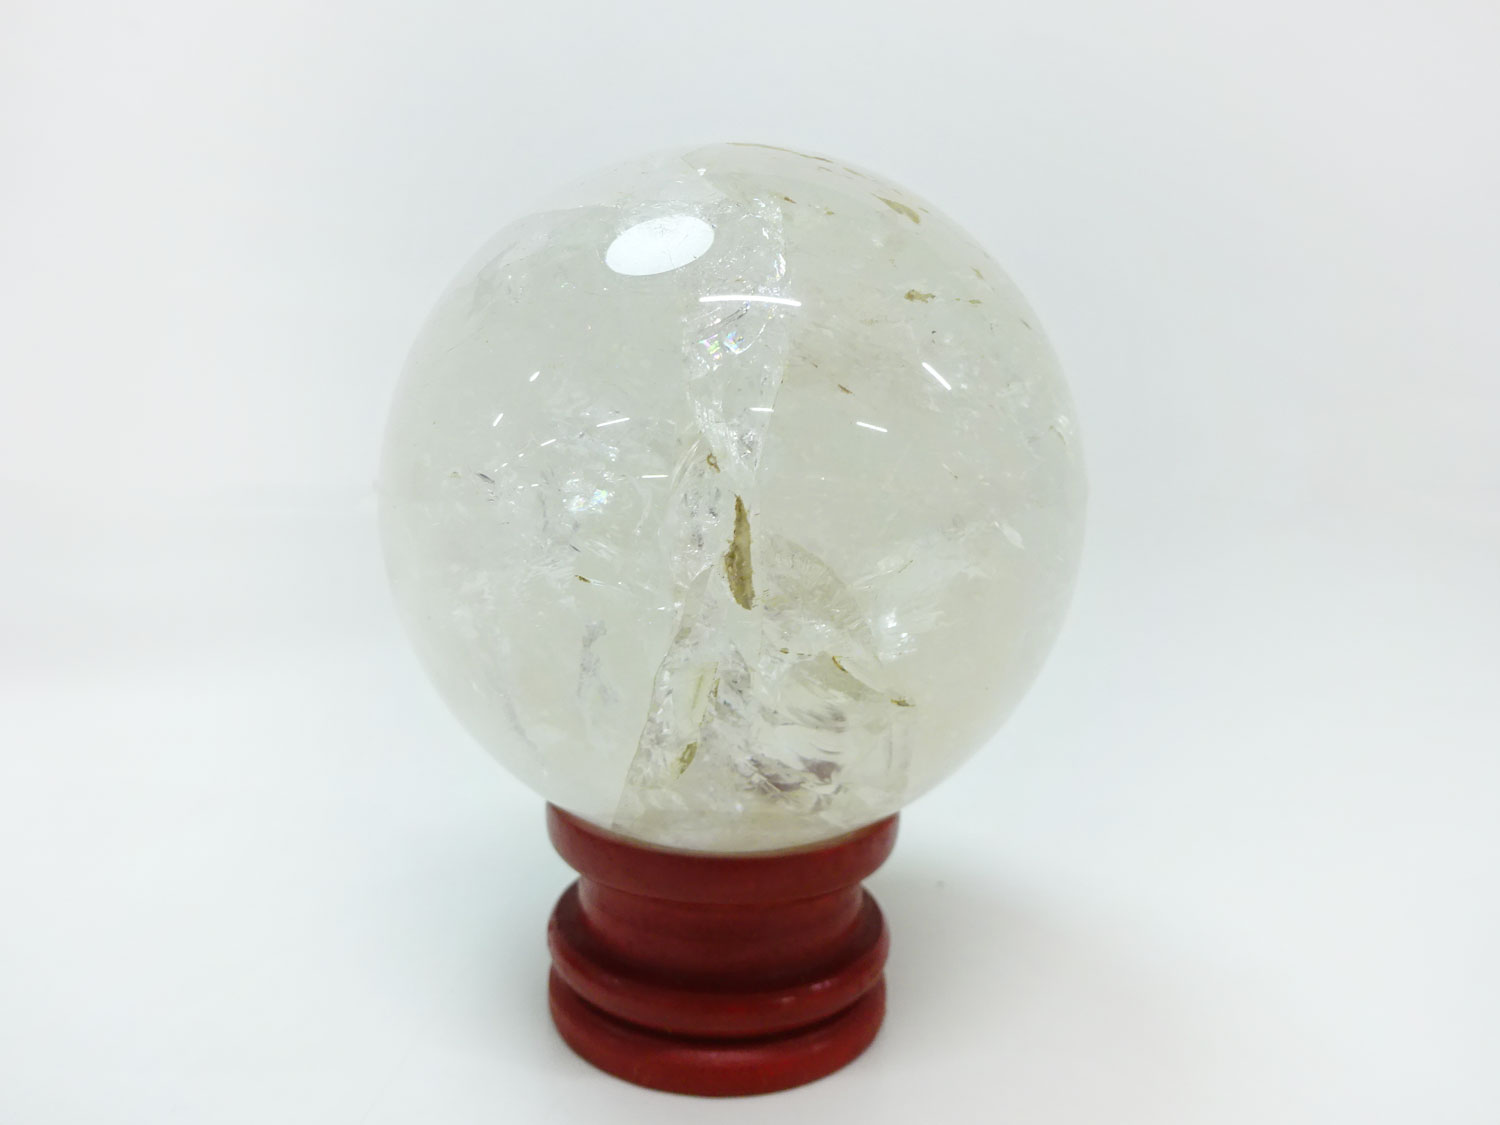 JAPANESE ORNAMENT / NATURAL CRYSTAL & MINERAL (630g) / HEALING CRYSTAL SPHERE